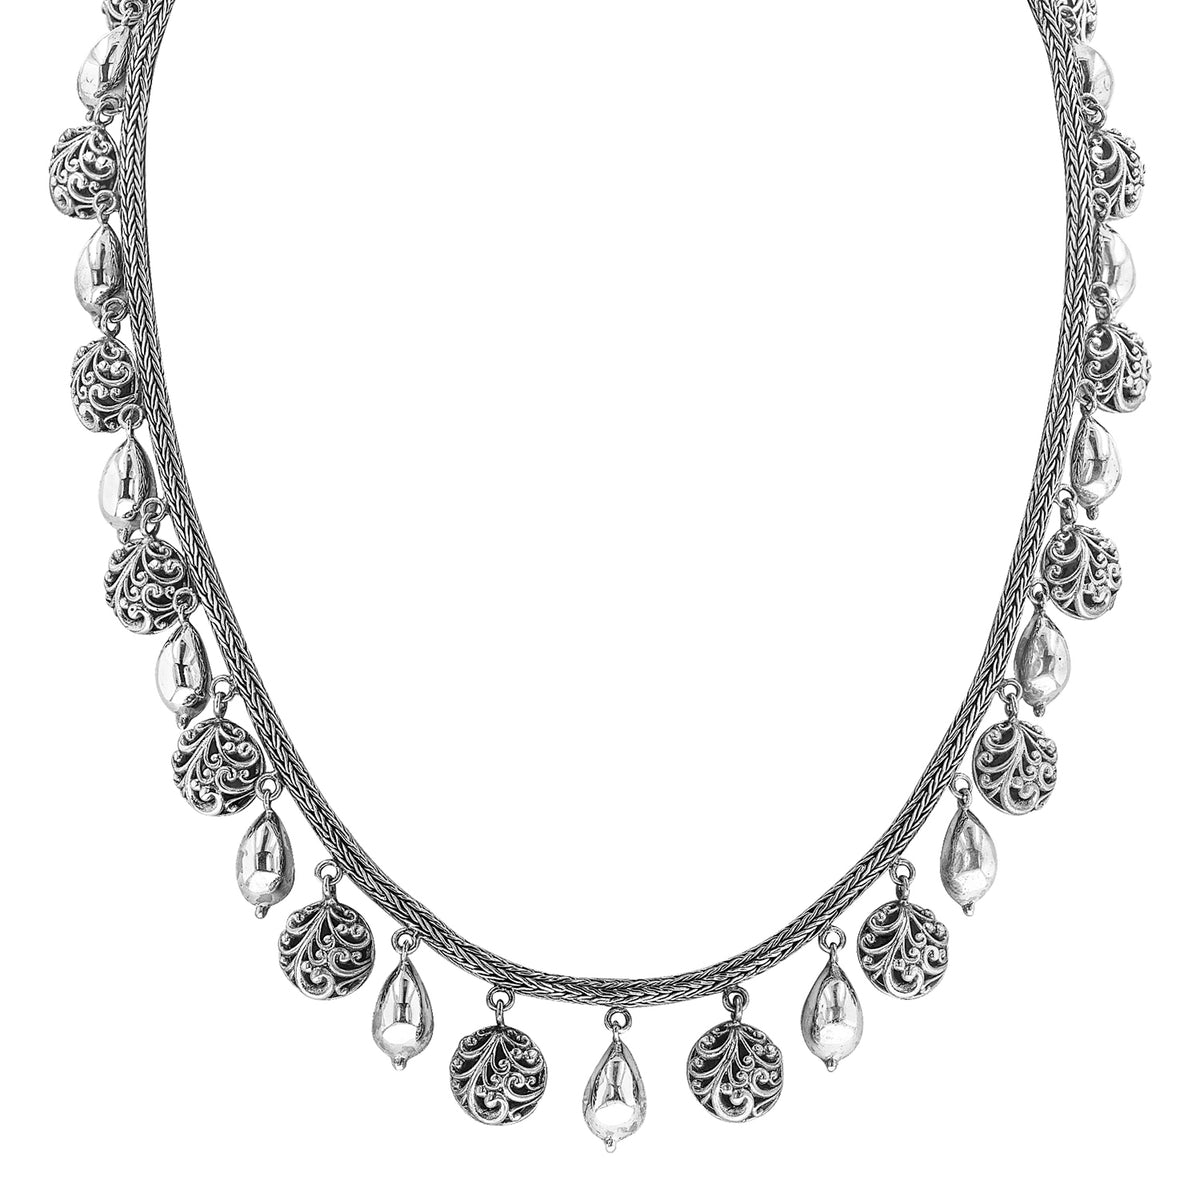 Bali Sterling Silver Tulang Naga Necklace with Round Scrollwork and Pe ...